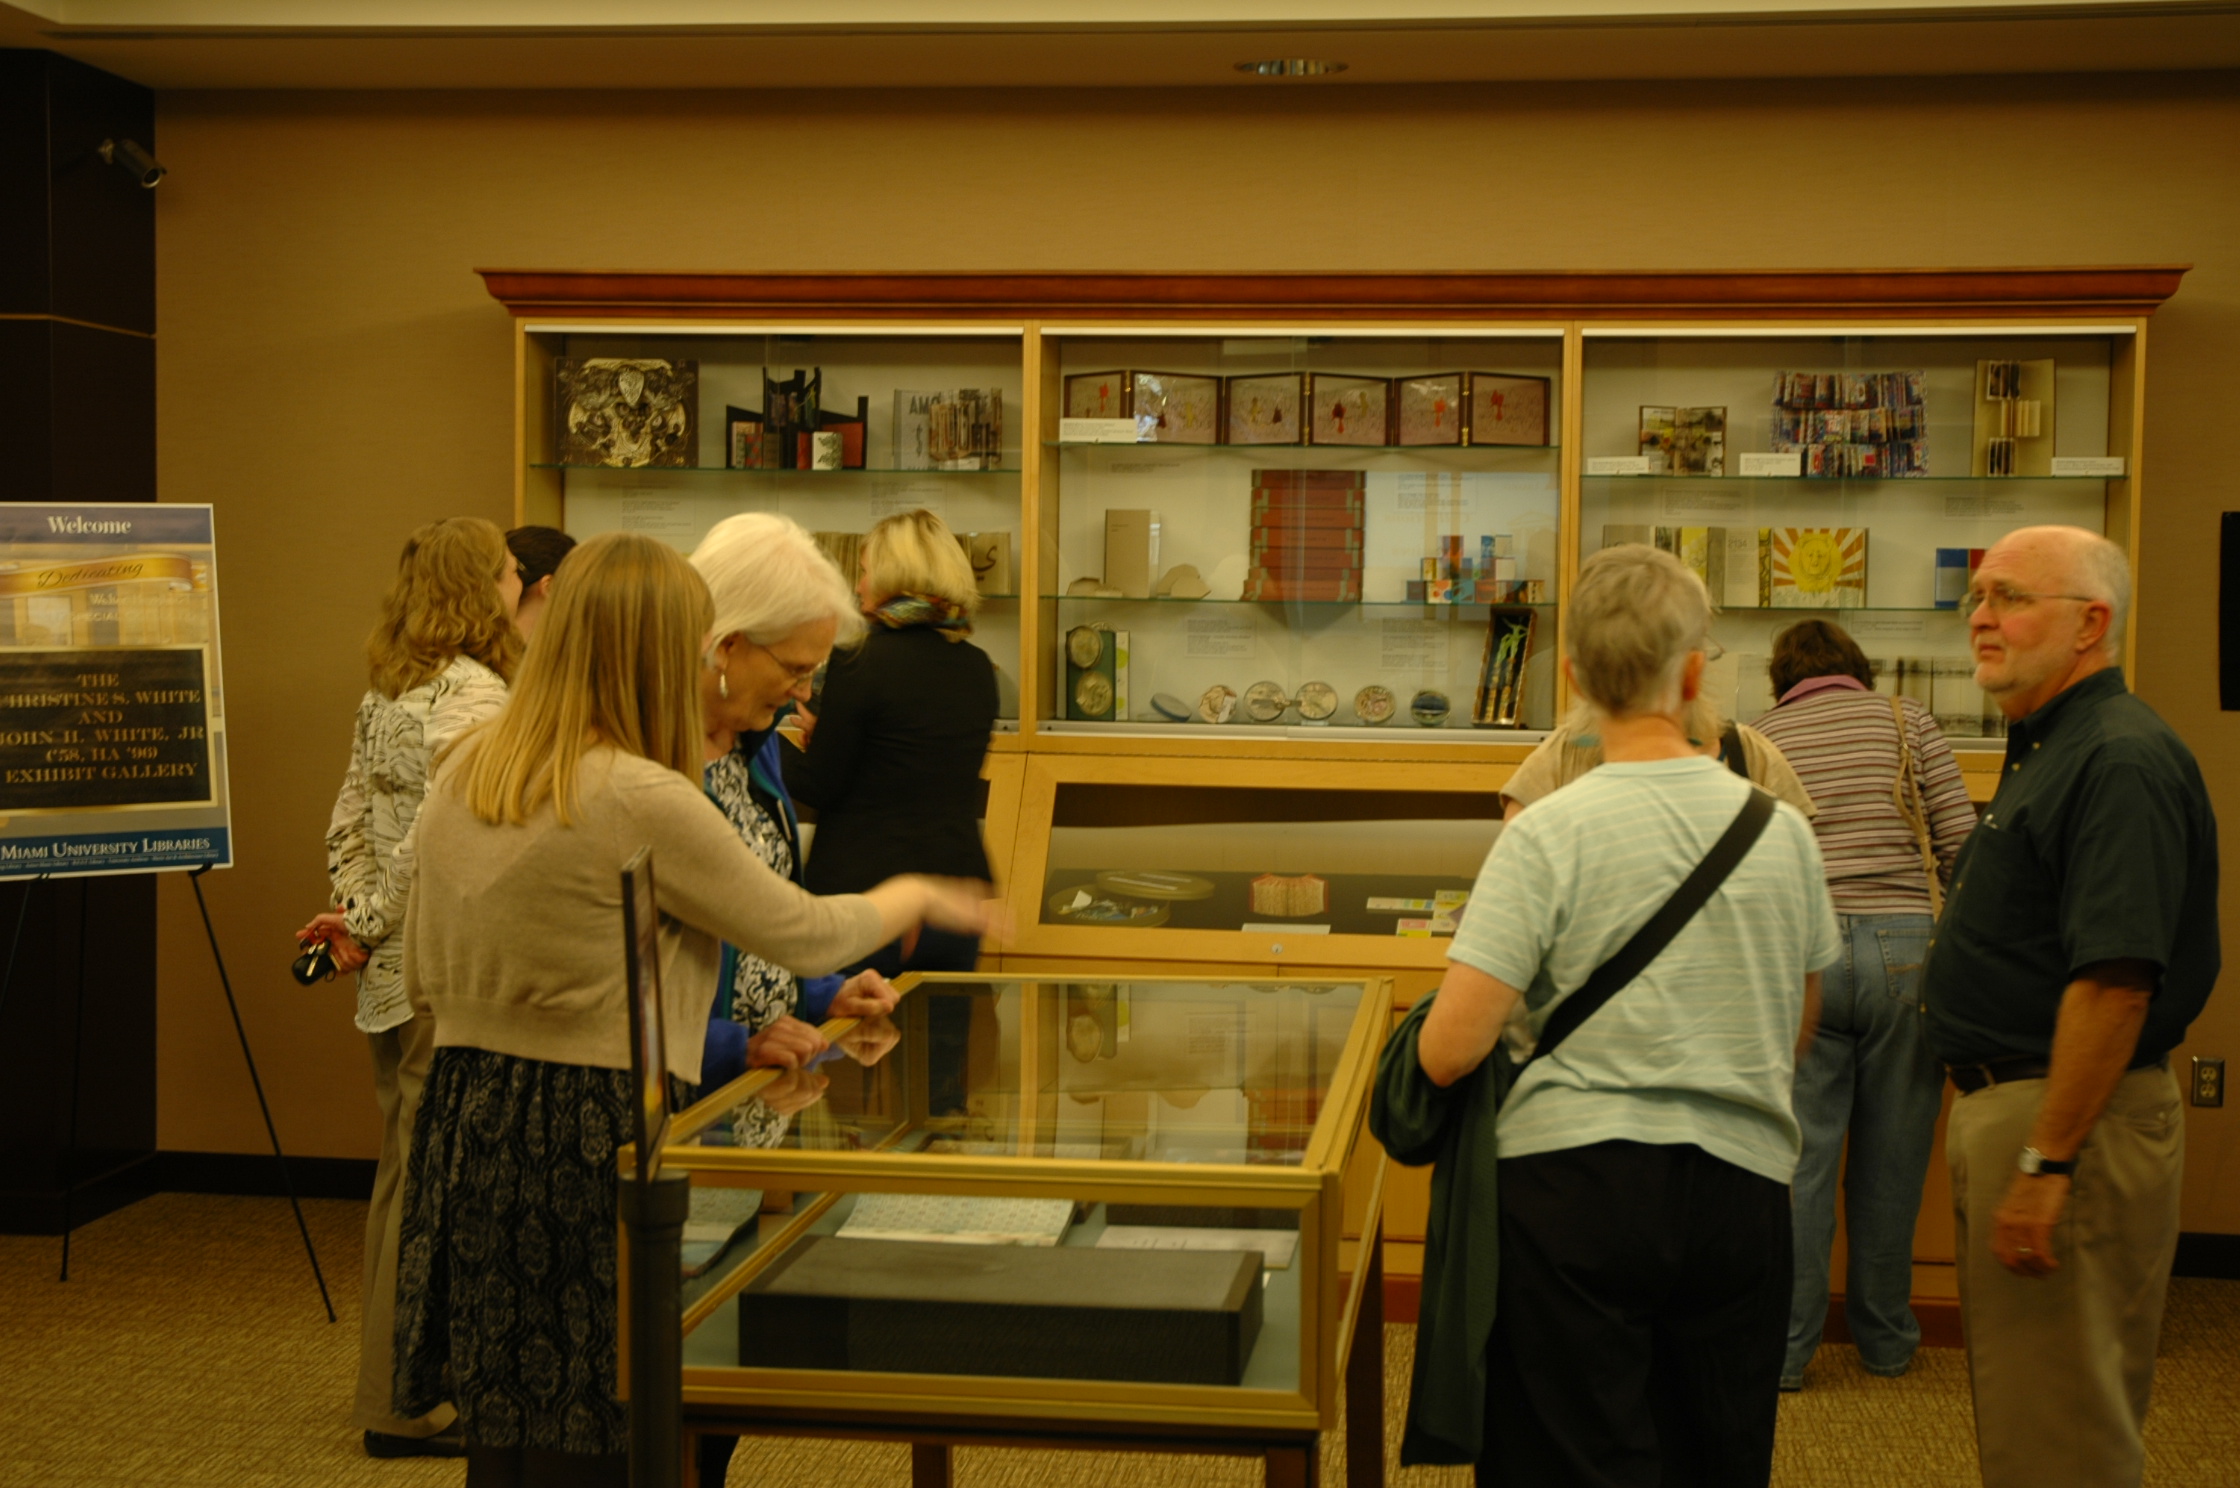 Guests browsing the exhibit